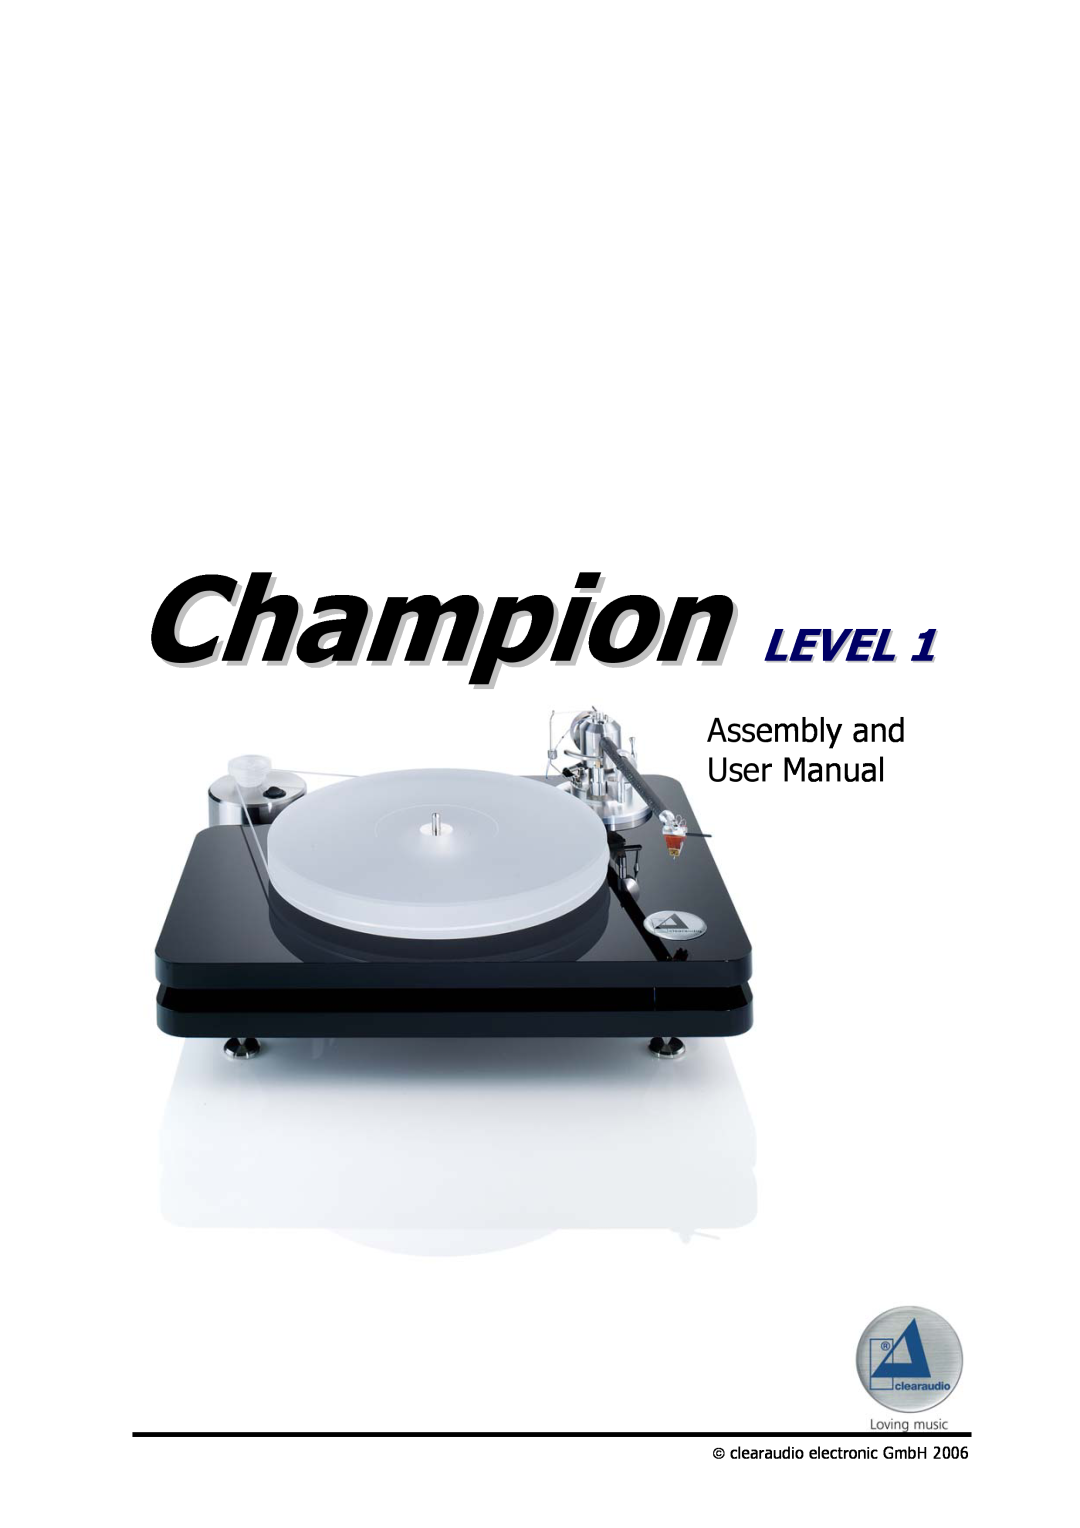 Clearaudio user manual Champion LEVEL, Page, clearaudio electronic GmbH 